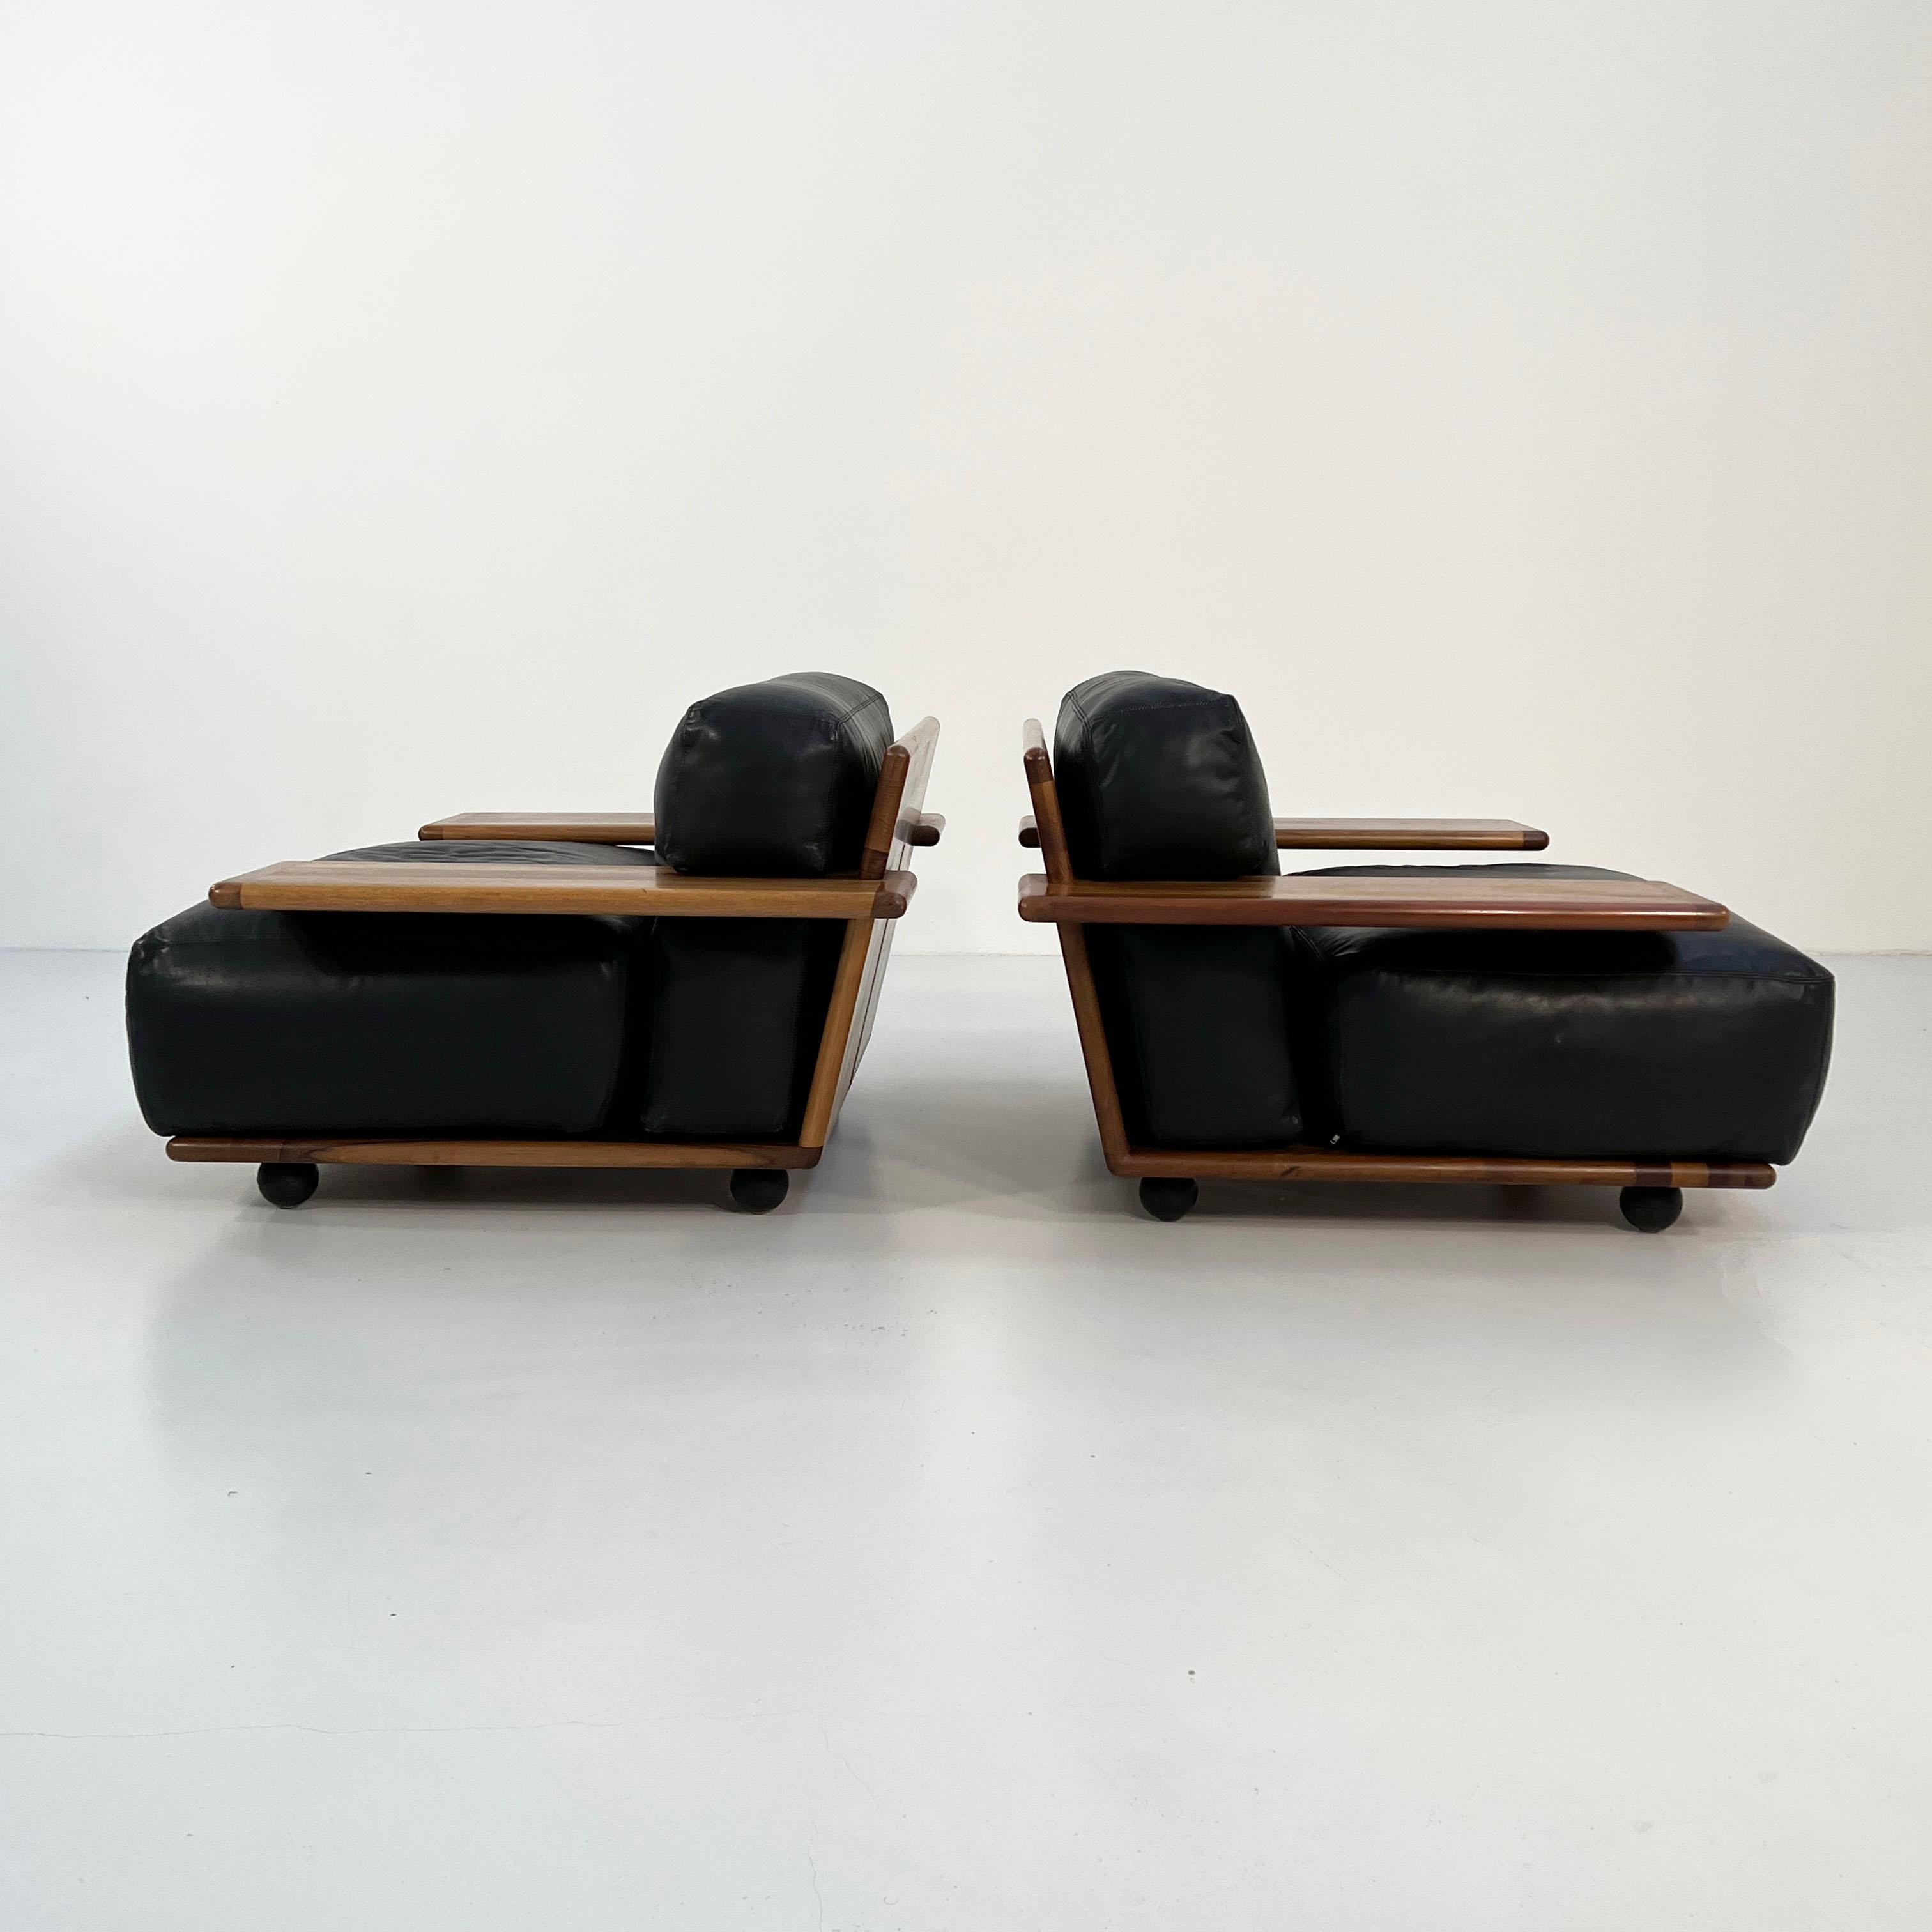 Italian Pianura Armchair in Black Leather by Mario Bellini for Cassina, 1970s For Sale